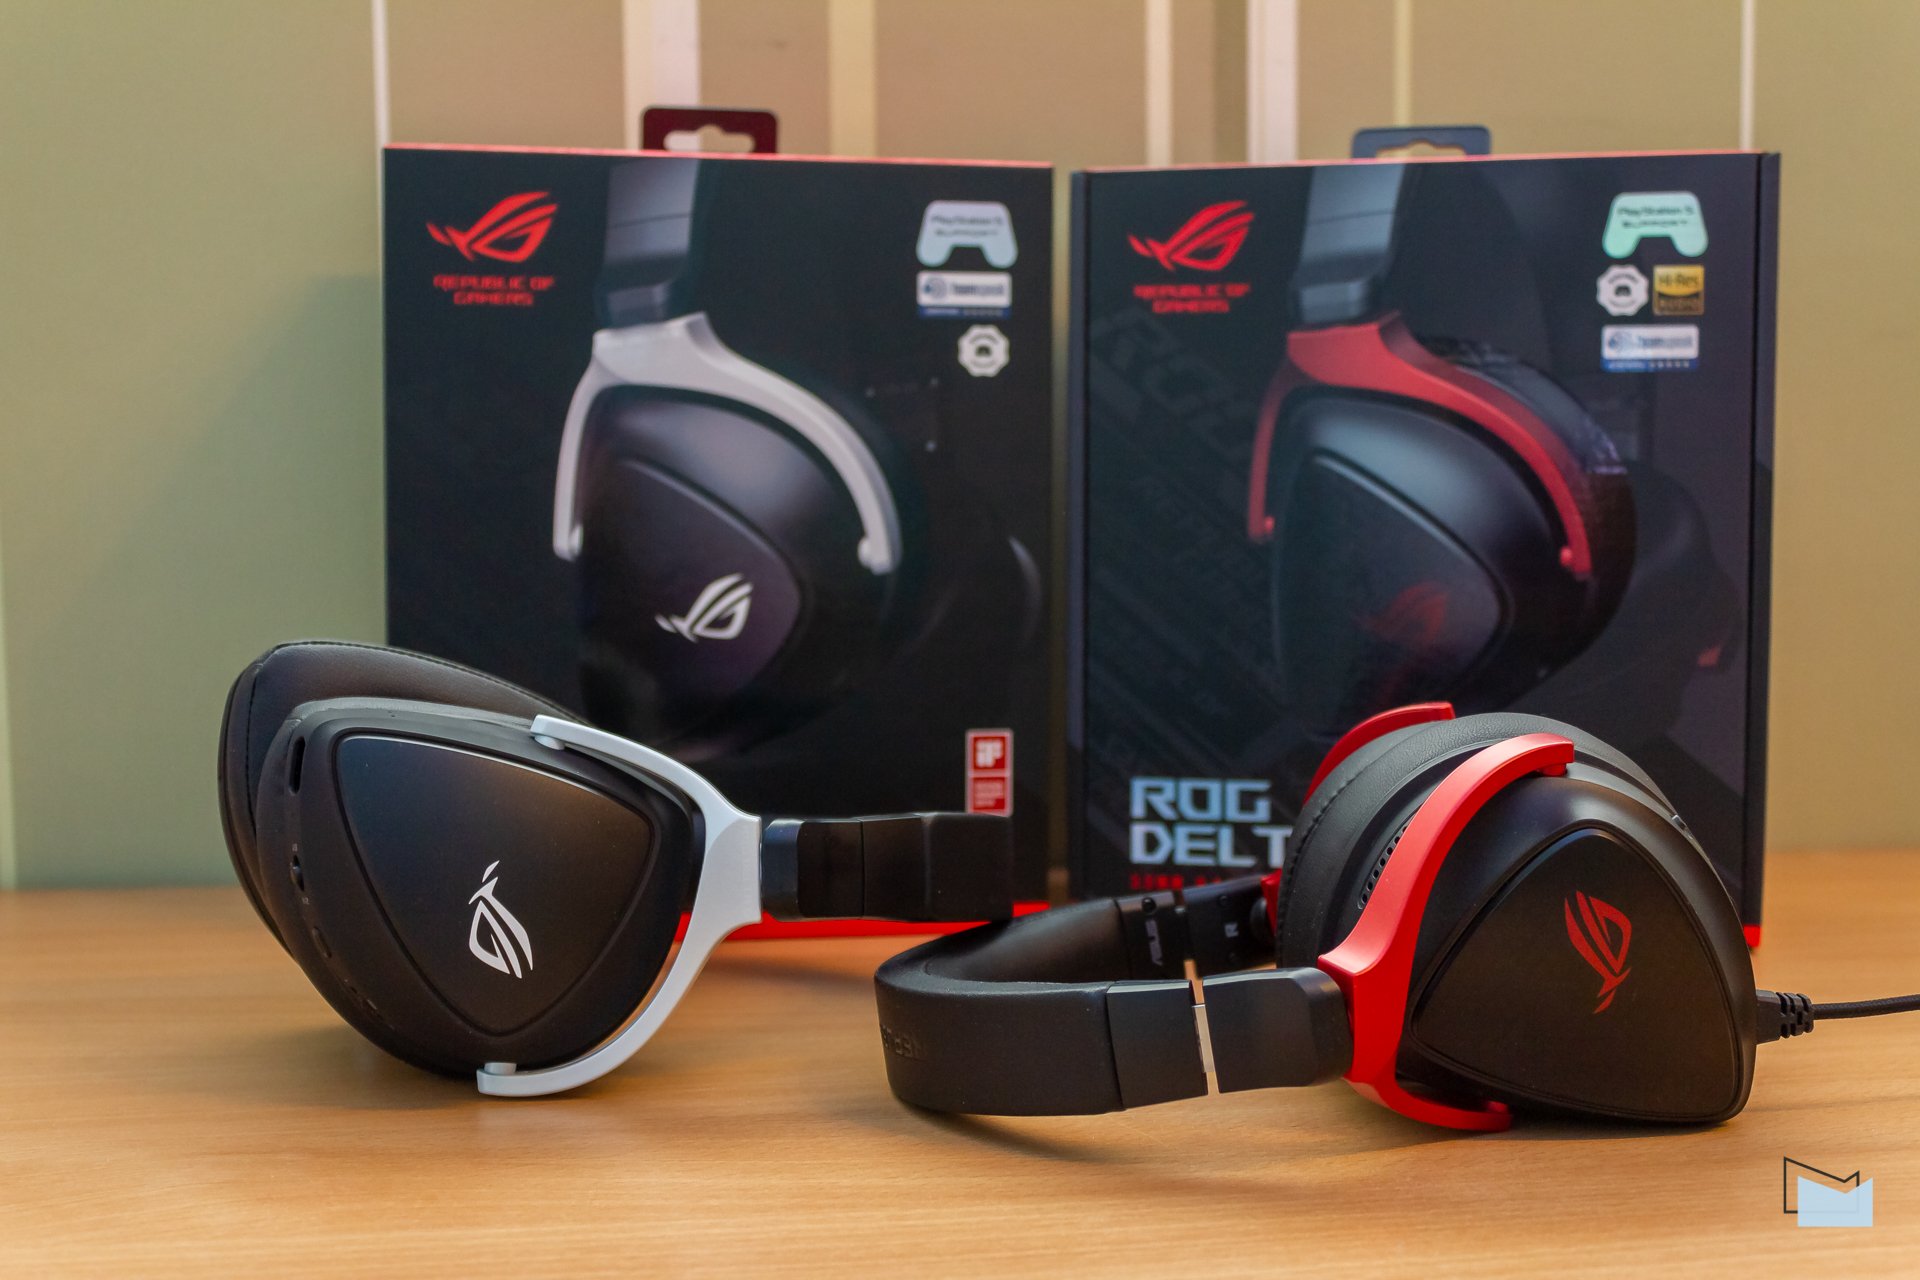 ASUS Republic of Gamers Delta Gaming Headset ROG DELTA WHITE B&H